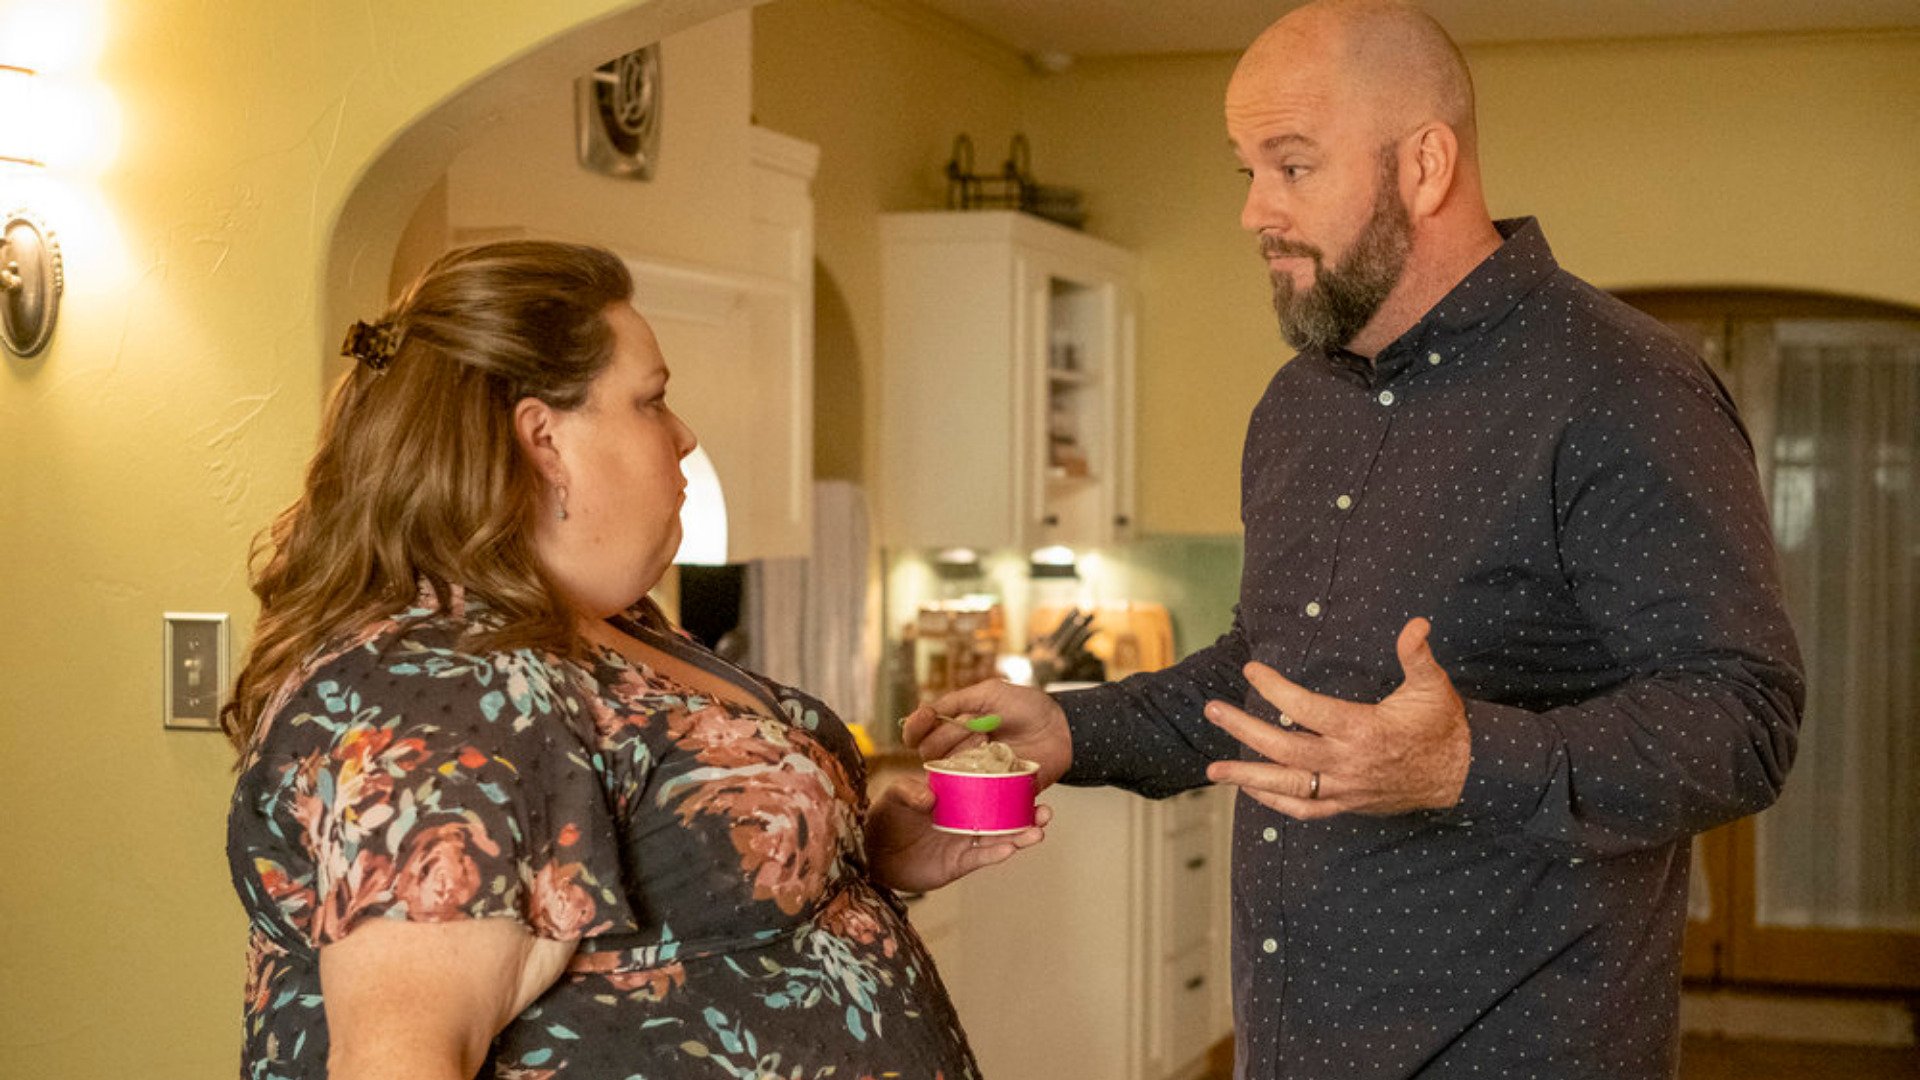 Chrissy Metz as Kate and Chris Sullivan as Toby look at each other in ‘This Is Us’ Season 6 Episode 3 